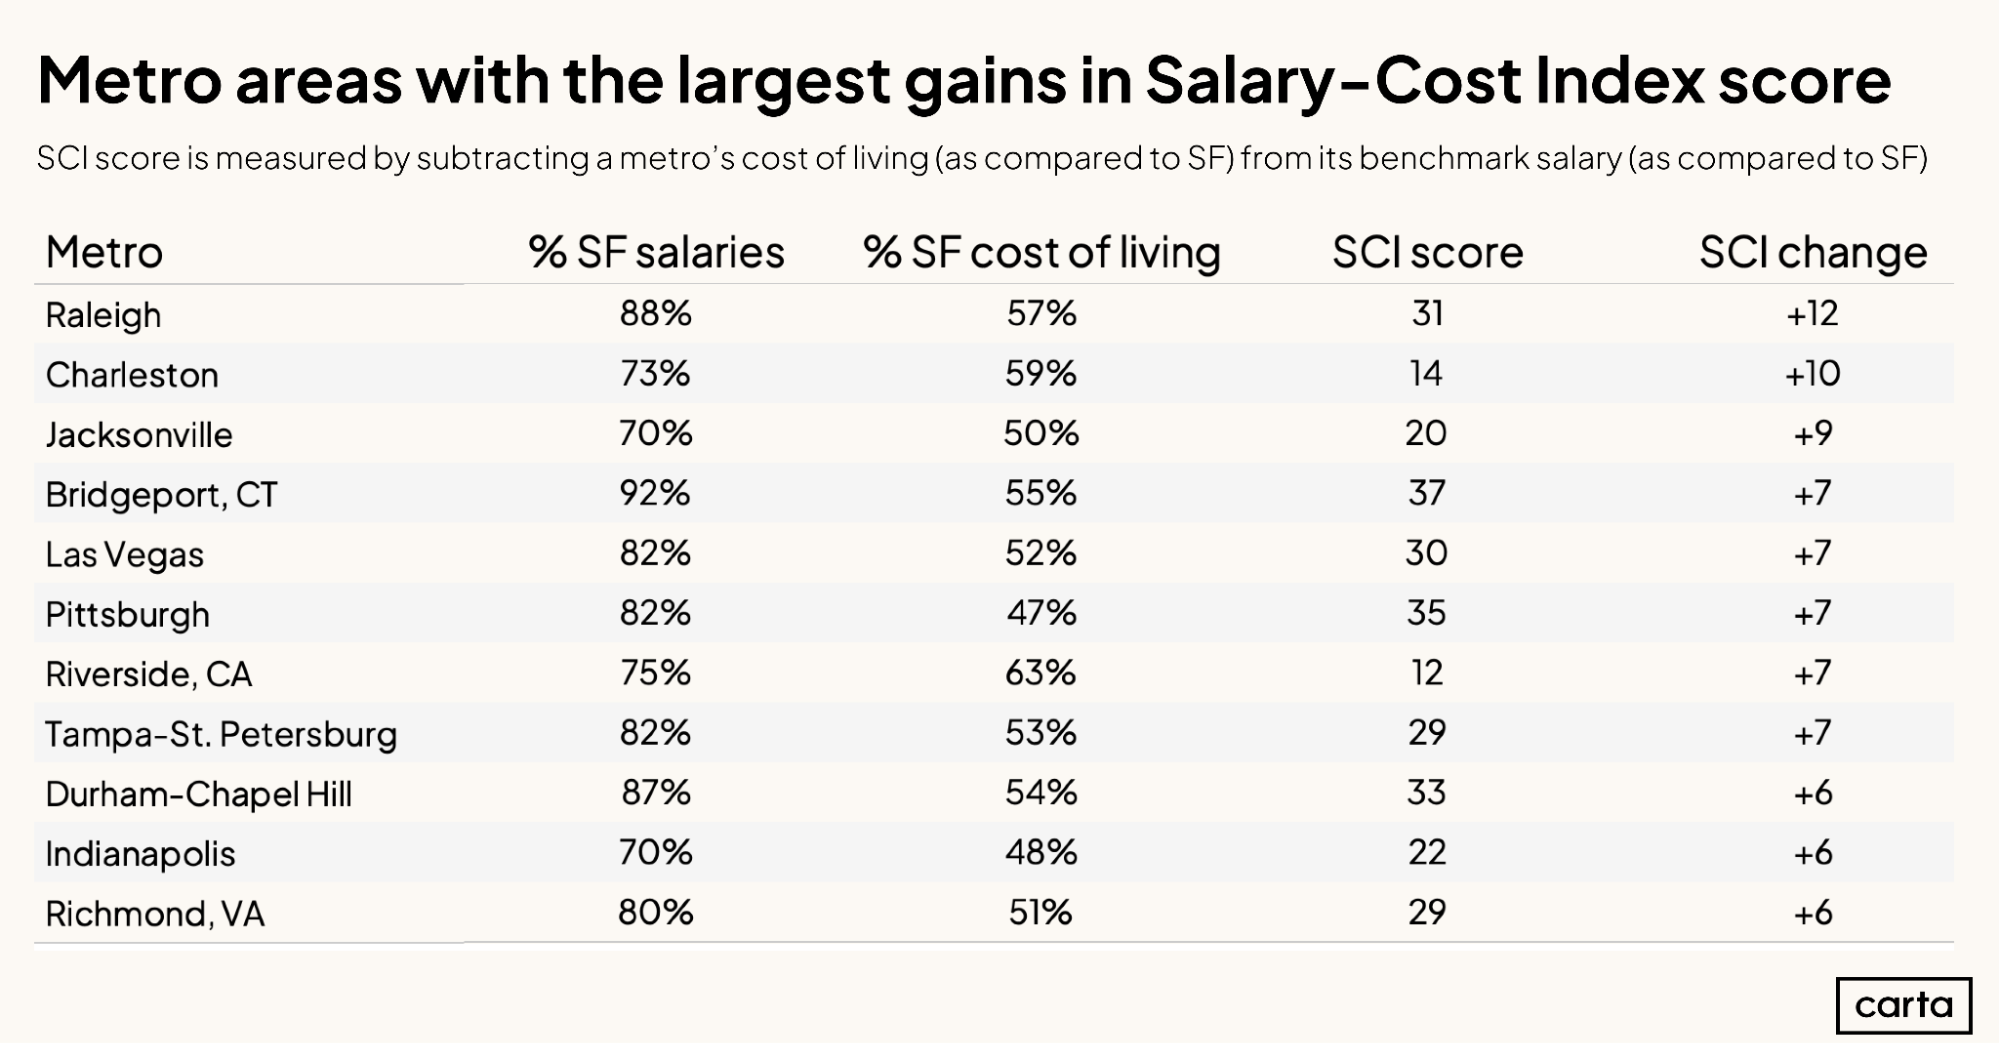 Metro areas with the largest gains in Salary-Cost Index score